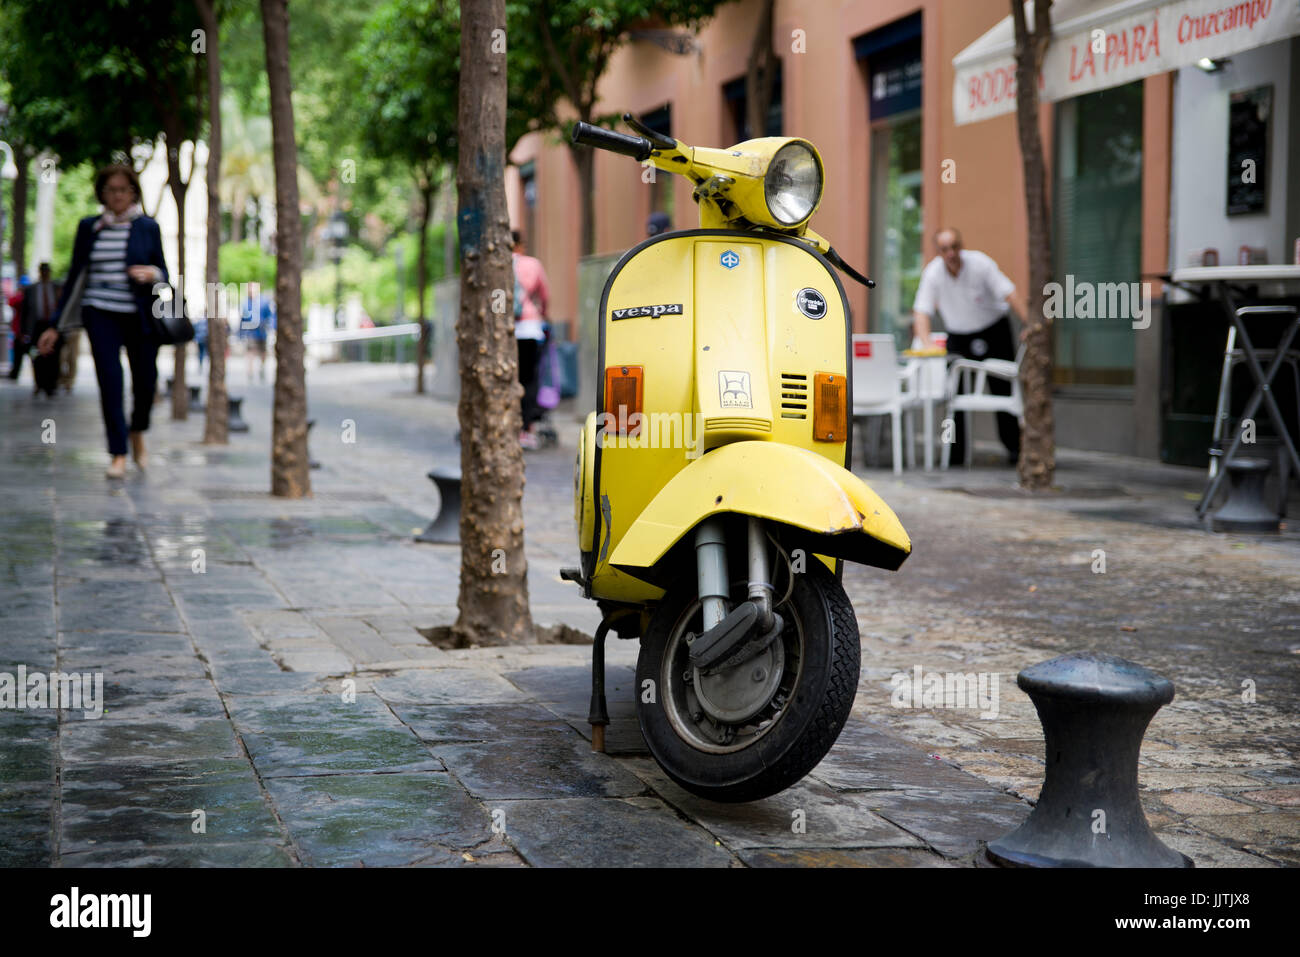 street scene with vintage yellow vespa scooter, seville spain Stock Photo